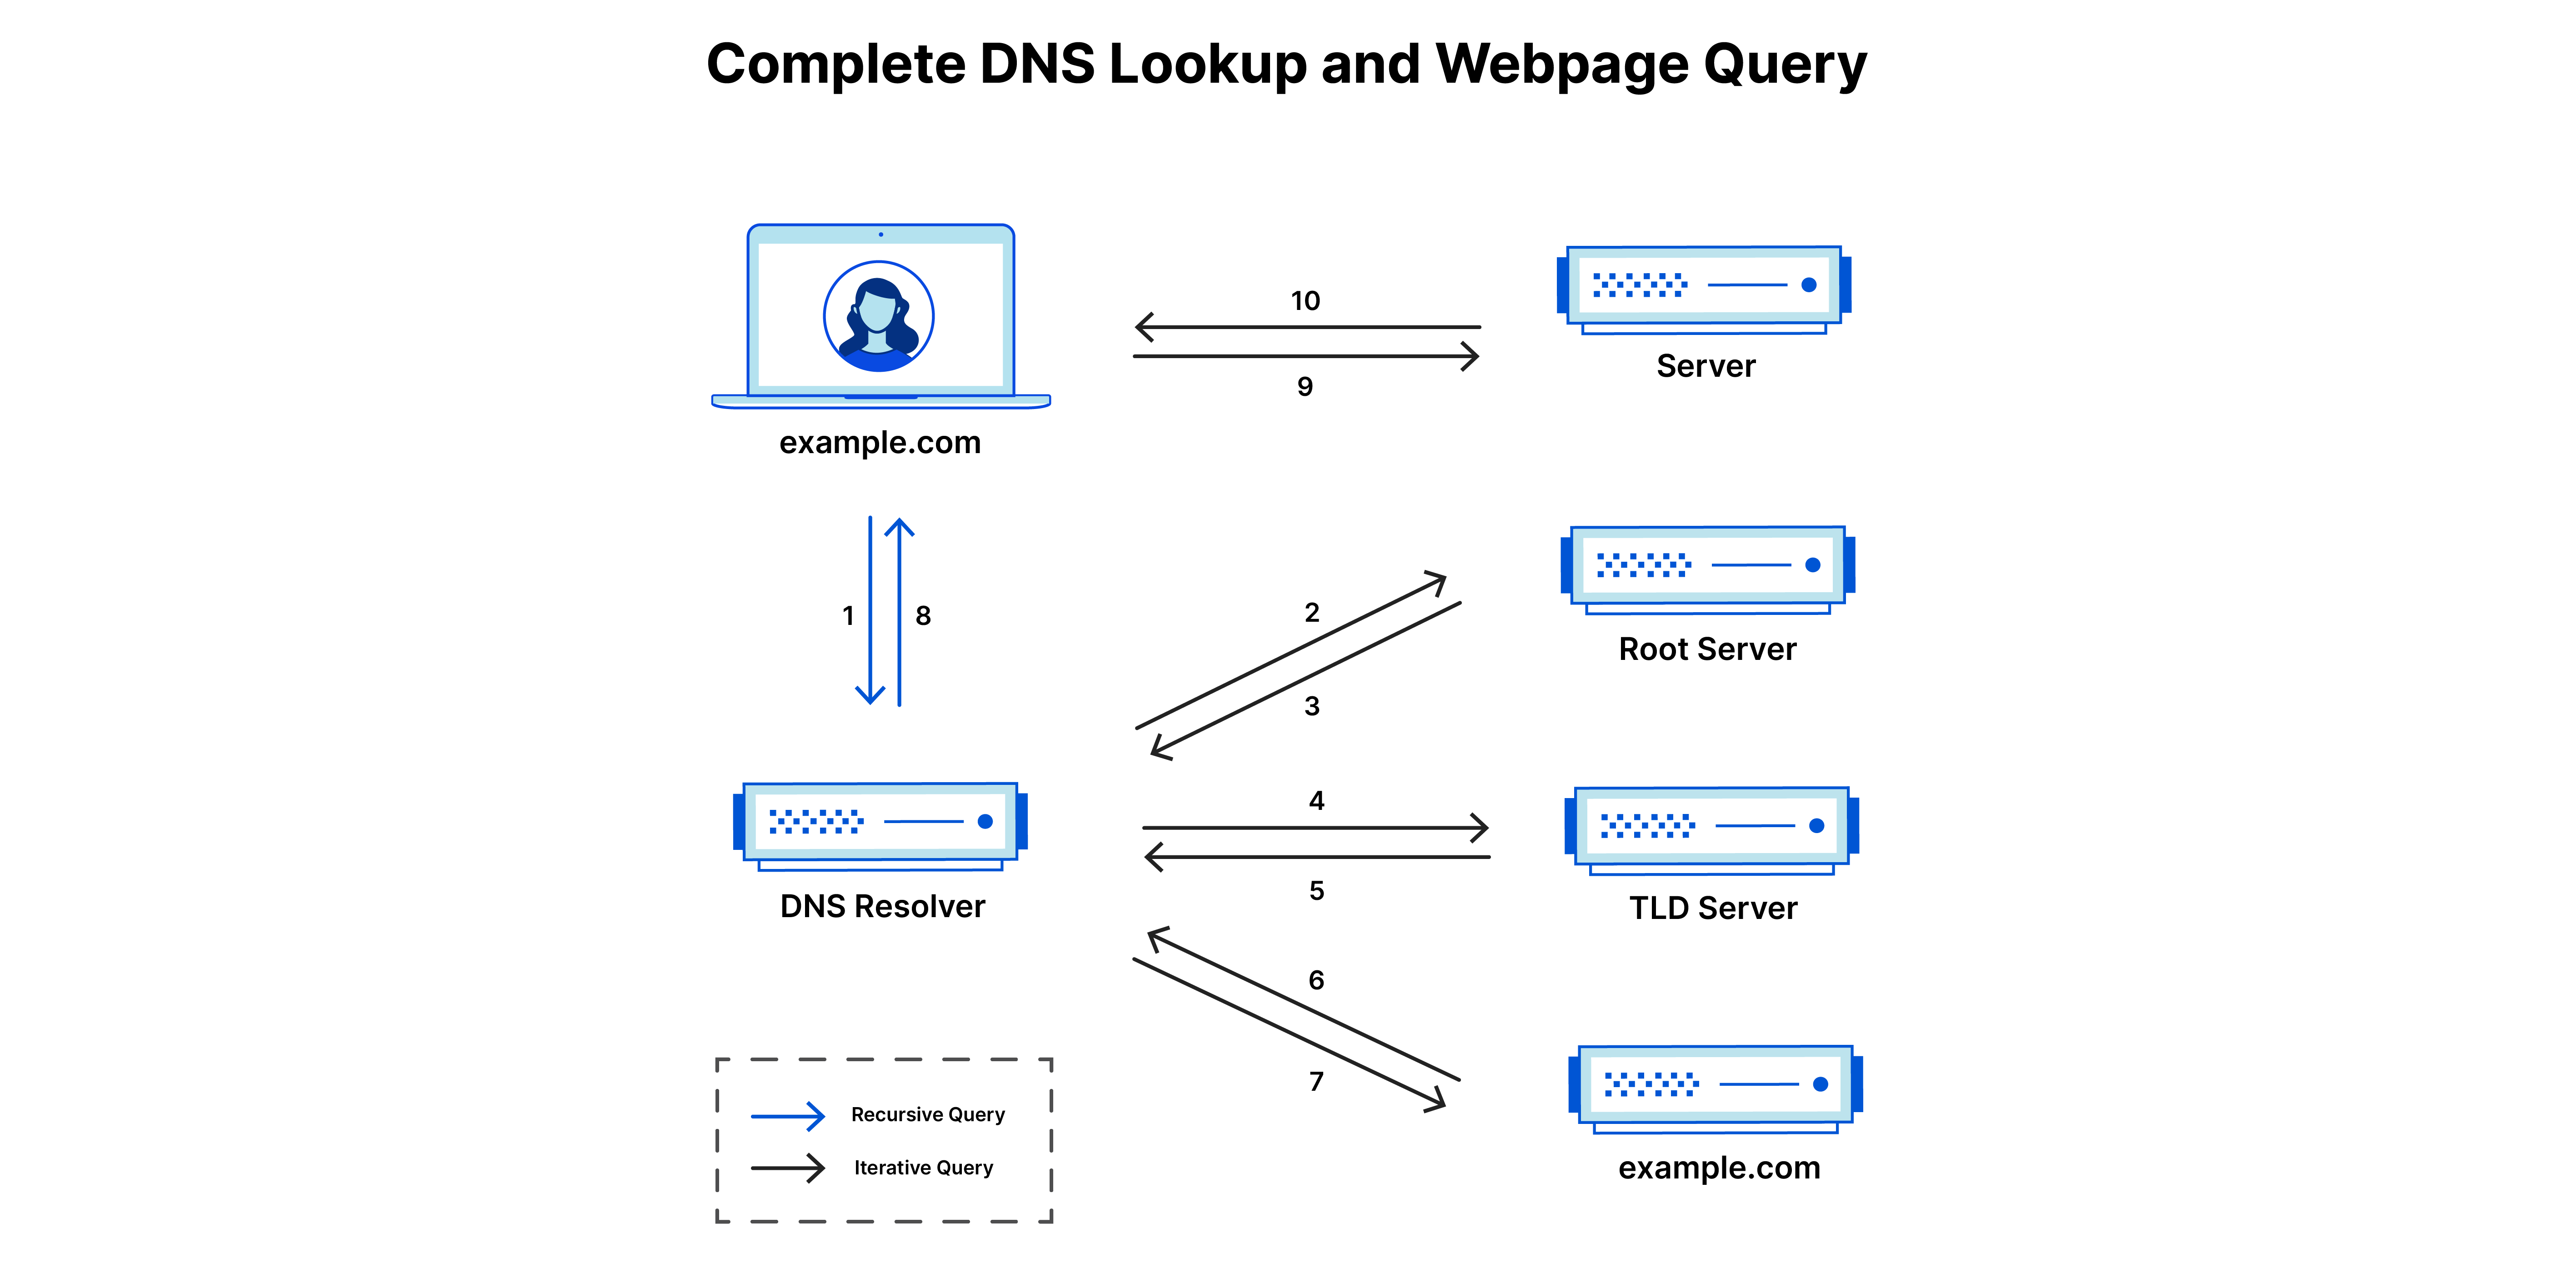 Complete DNS Lookup and Webpage Query - 10 steps